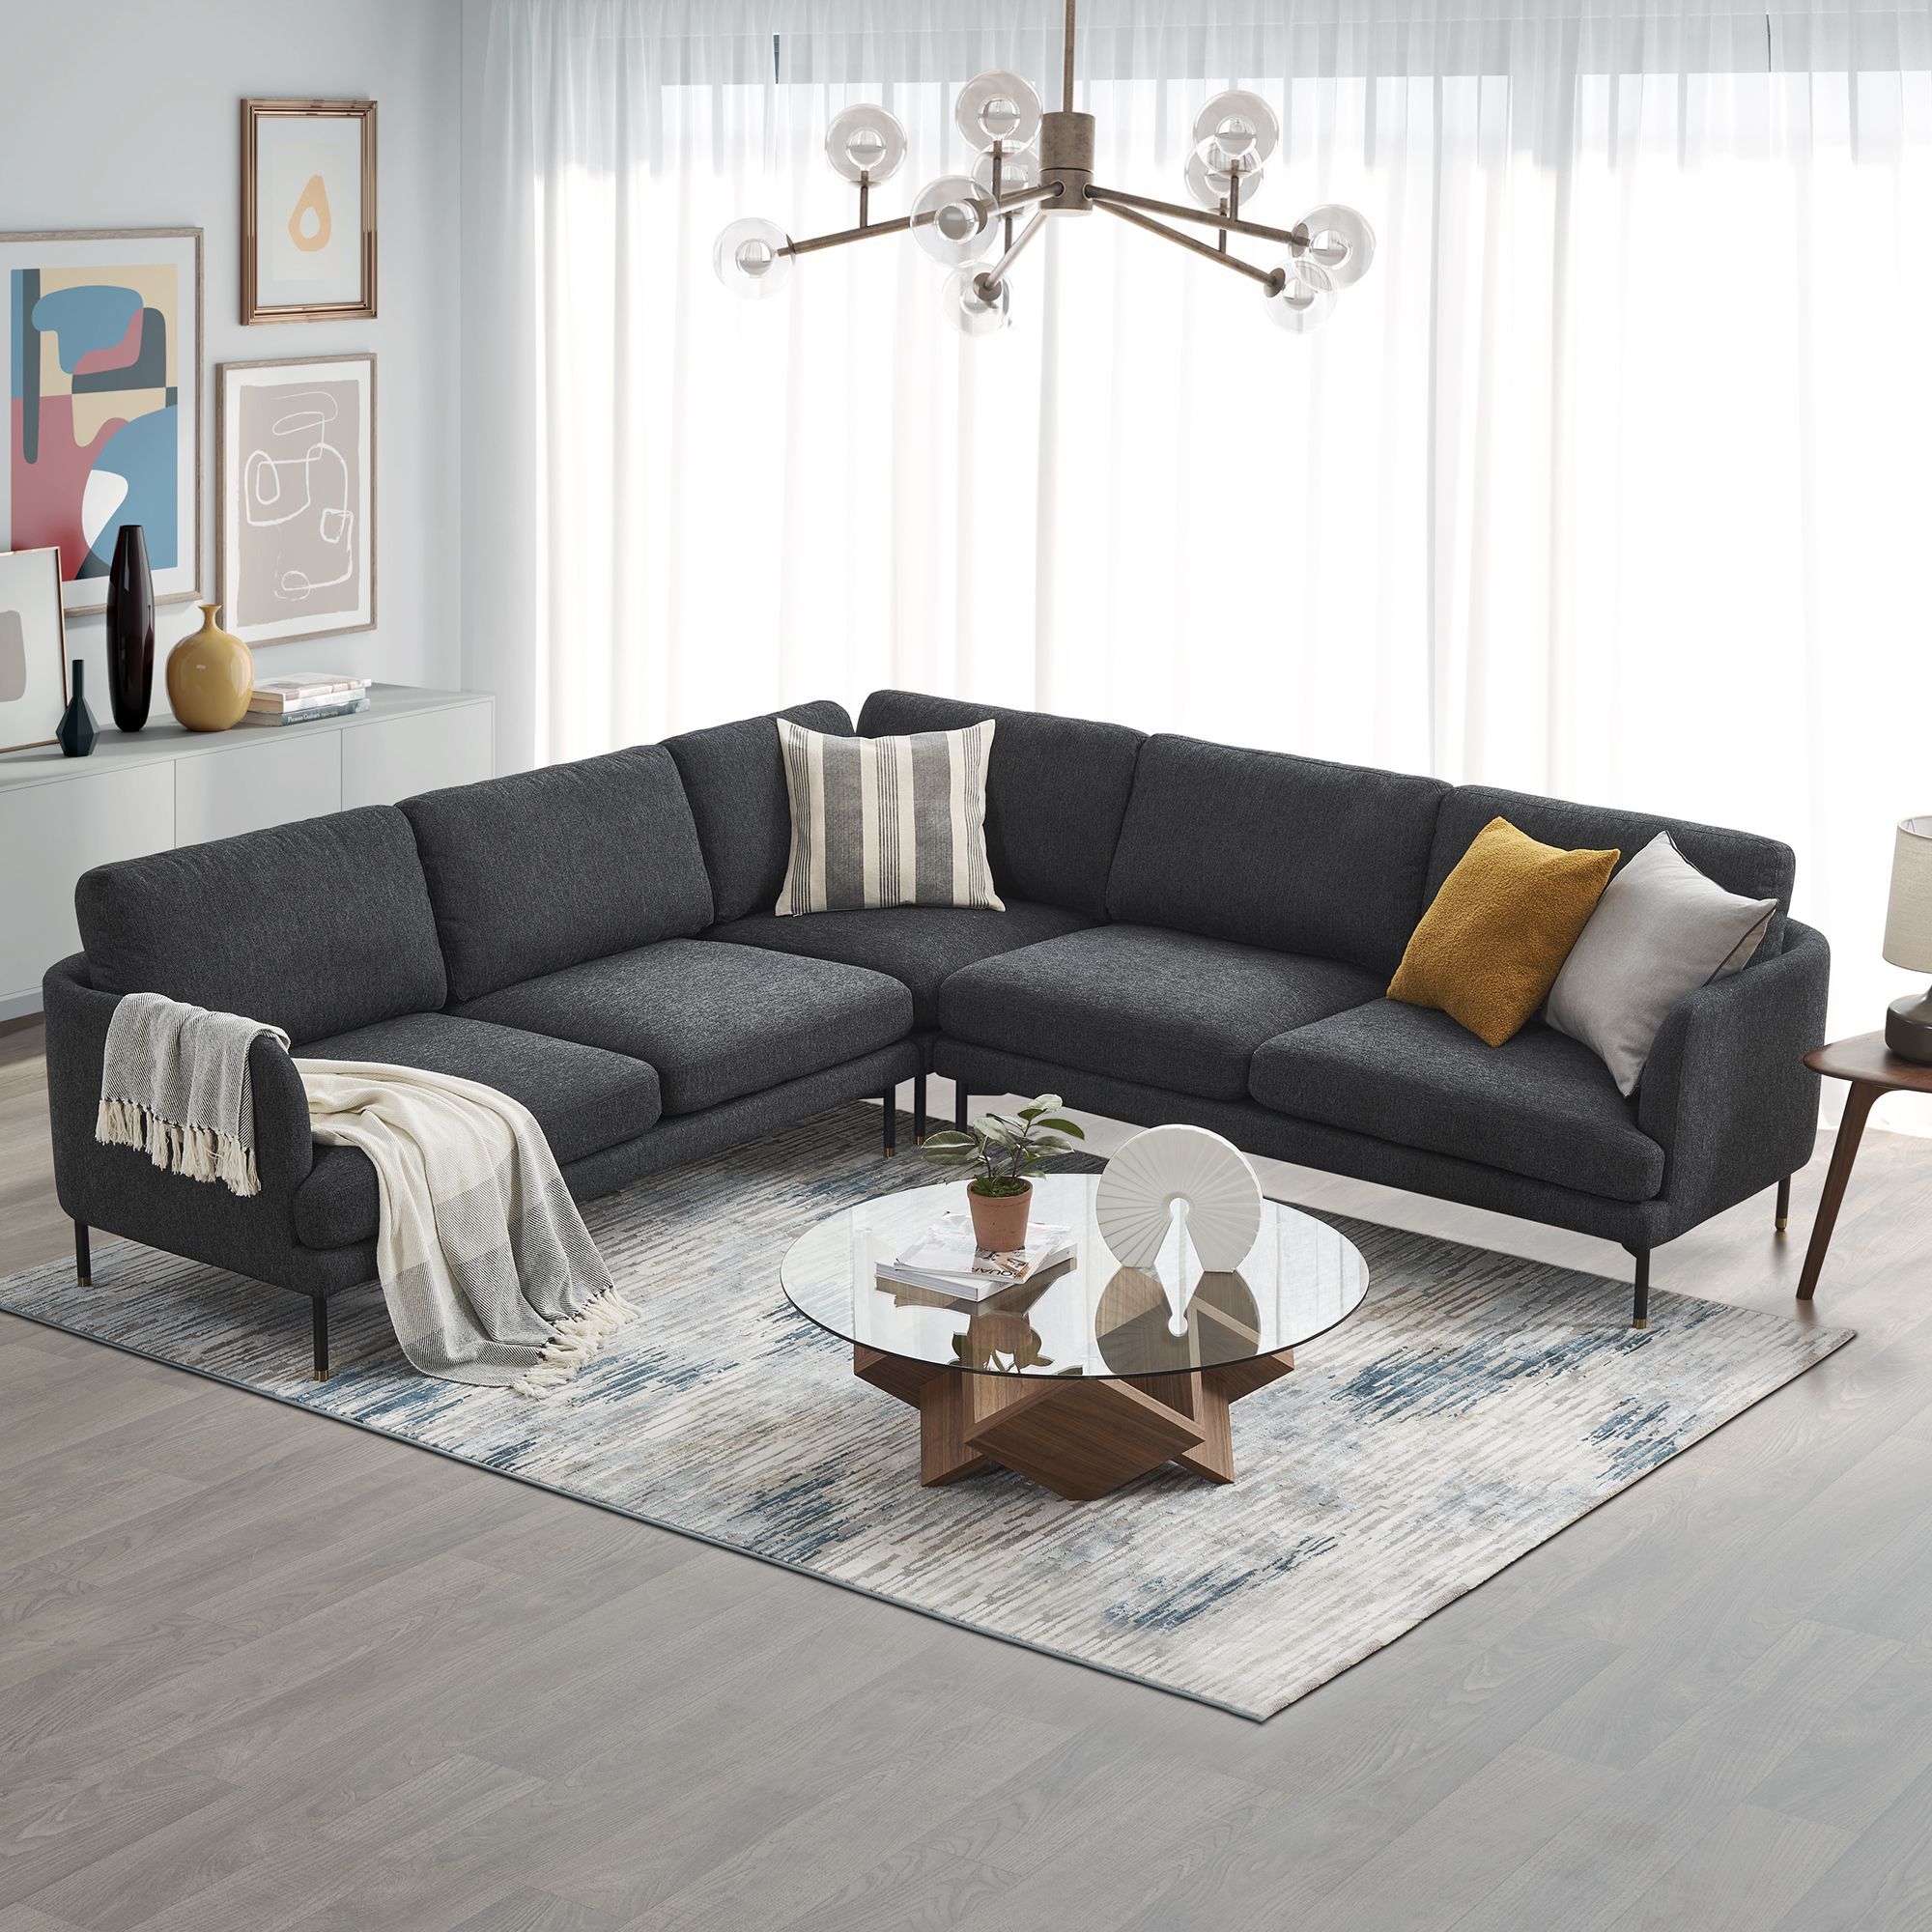 Pebble L Shape Sectional Sofa | Castlery | Dark Grey Sofa Living Room, Grey  Sofa Living Room, Living Room Color Schemes Pertaining To Dark Gray Sectional Sofas (View 9 of 15)